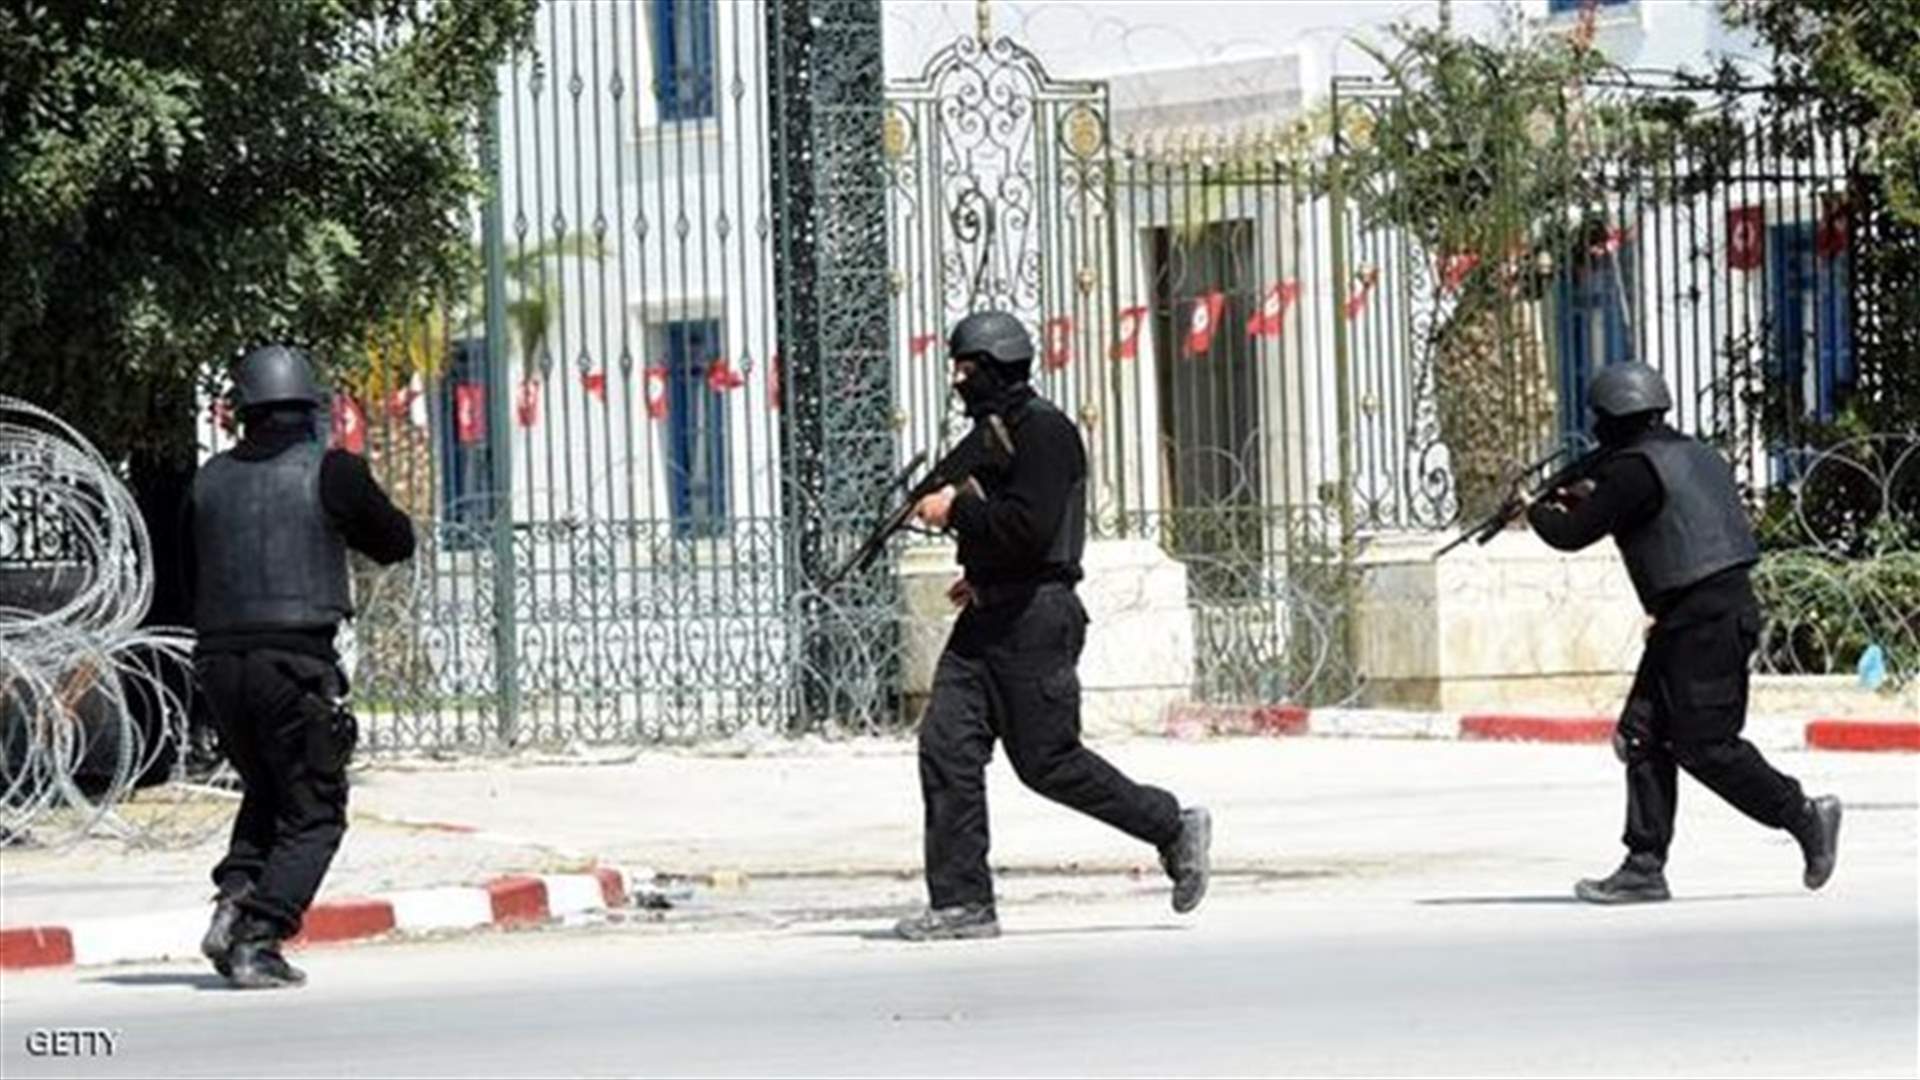 Tunisian foreign fighters to be dealt with under anti-terrorism law - PM